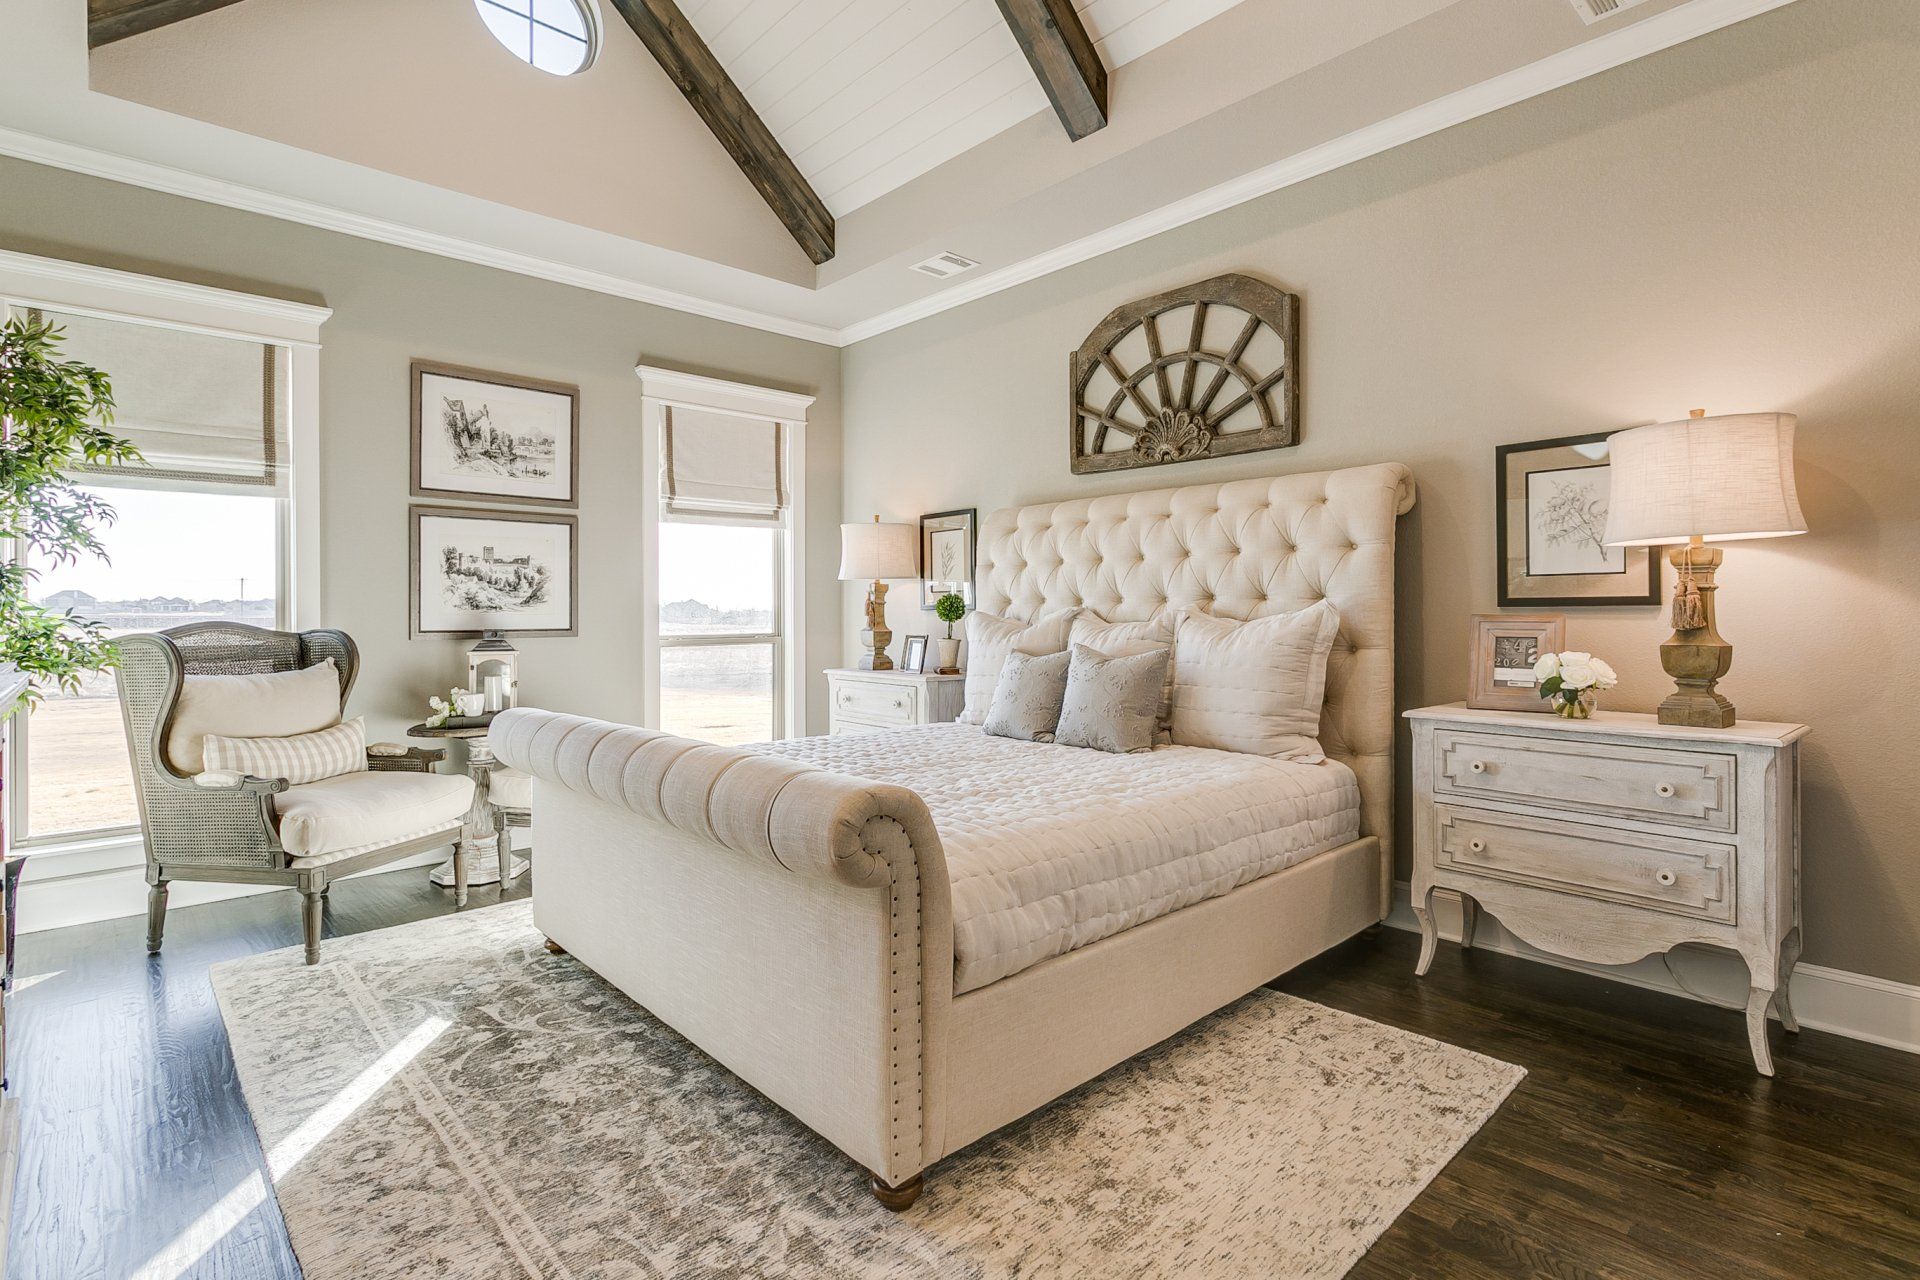 Elegant bedroom | John Houston Homes | New Homes for Sale in Dallas-Fort Worth, Waco and surrounding areas.